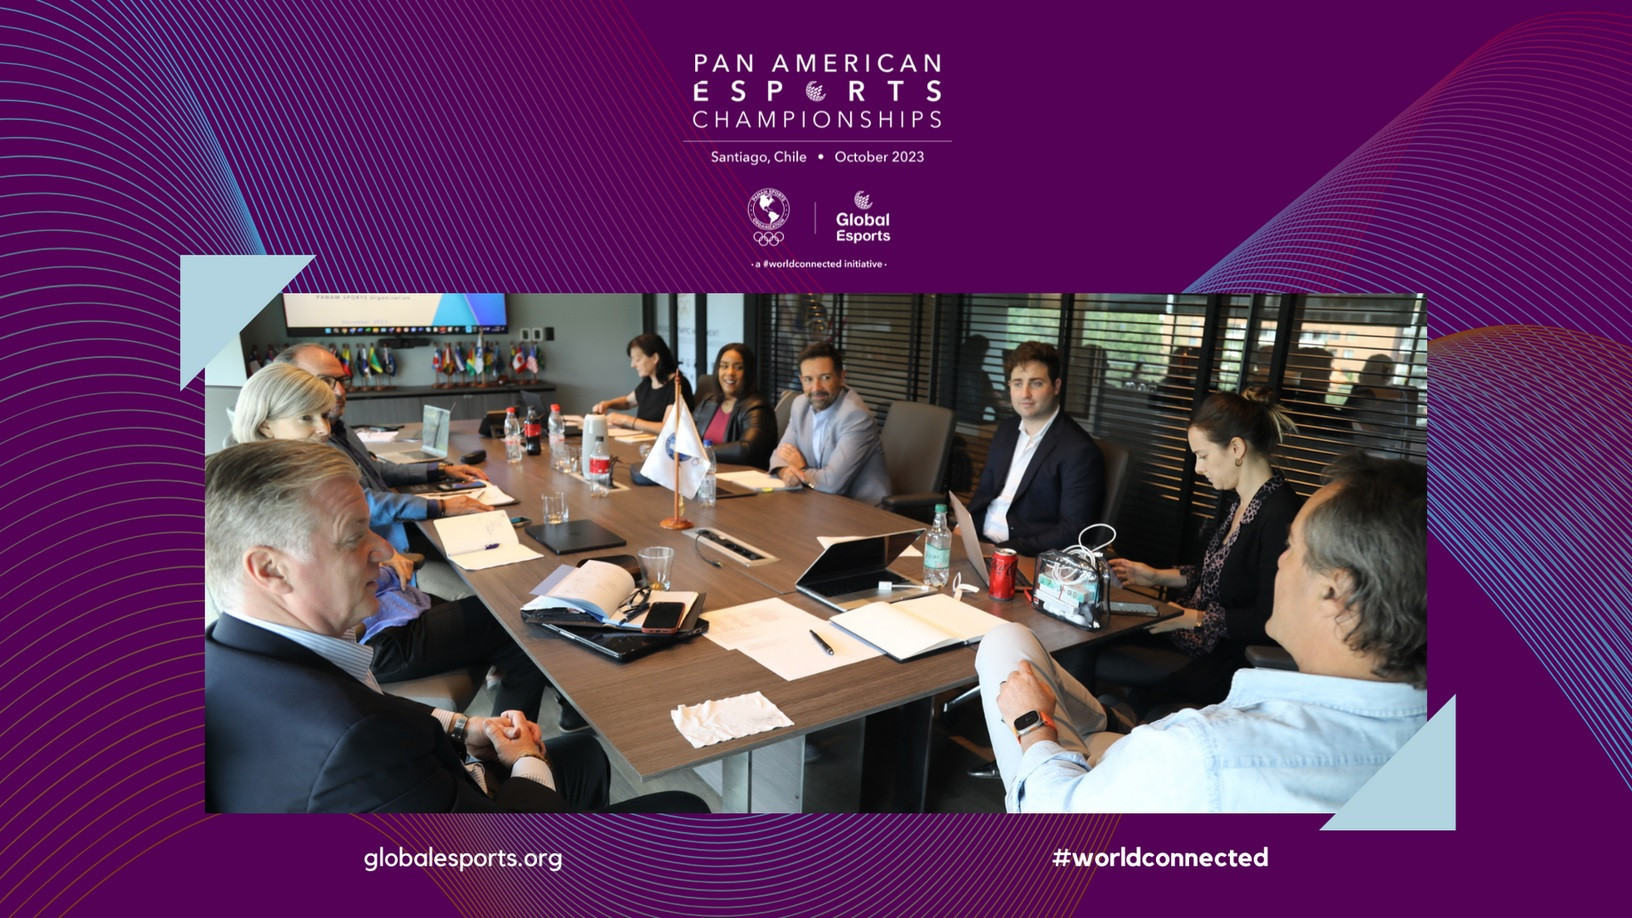 GEF discusses plans for Pan American Esports Championships during Santiago visit